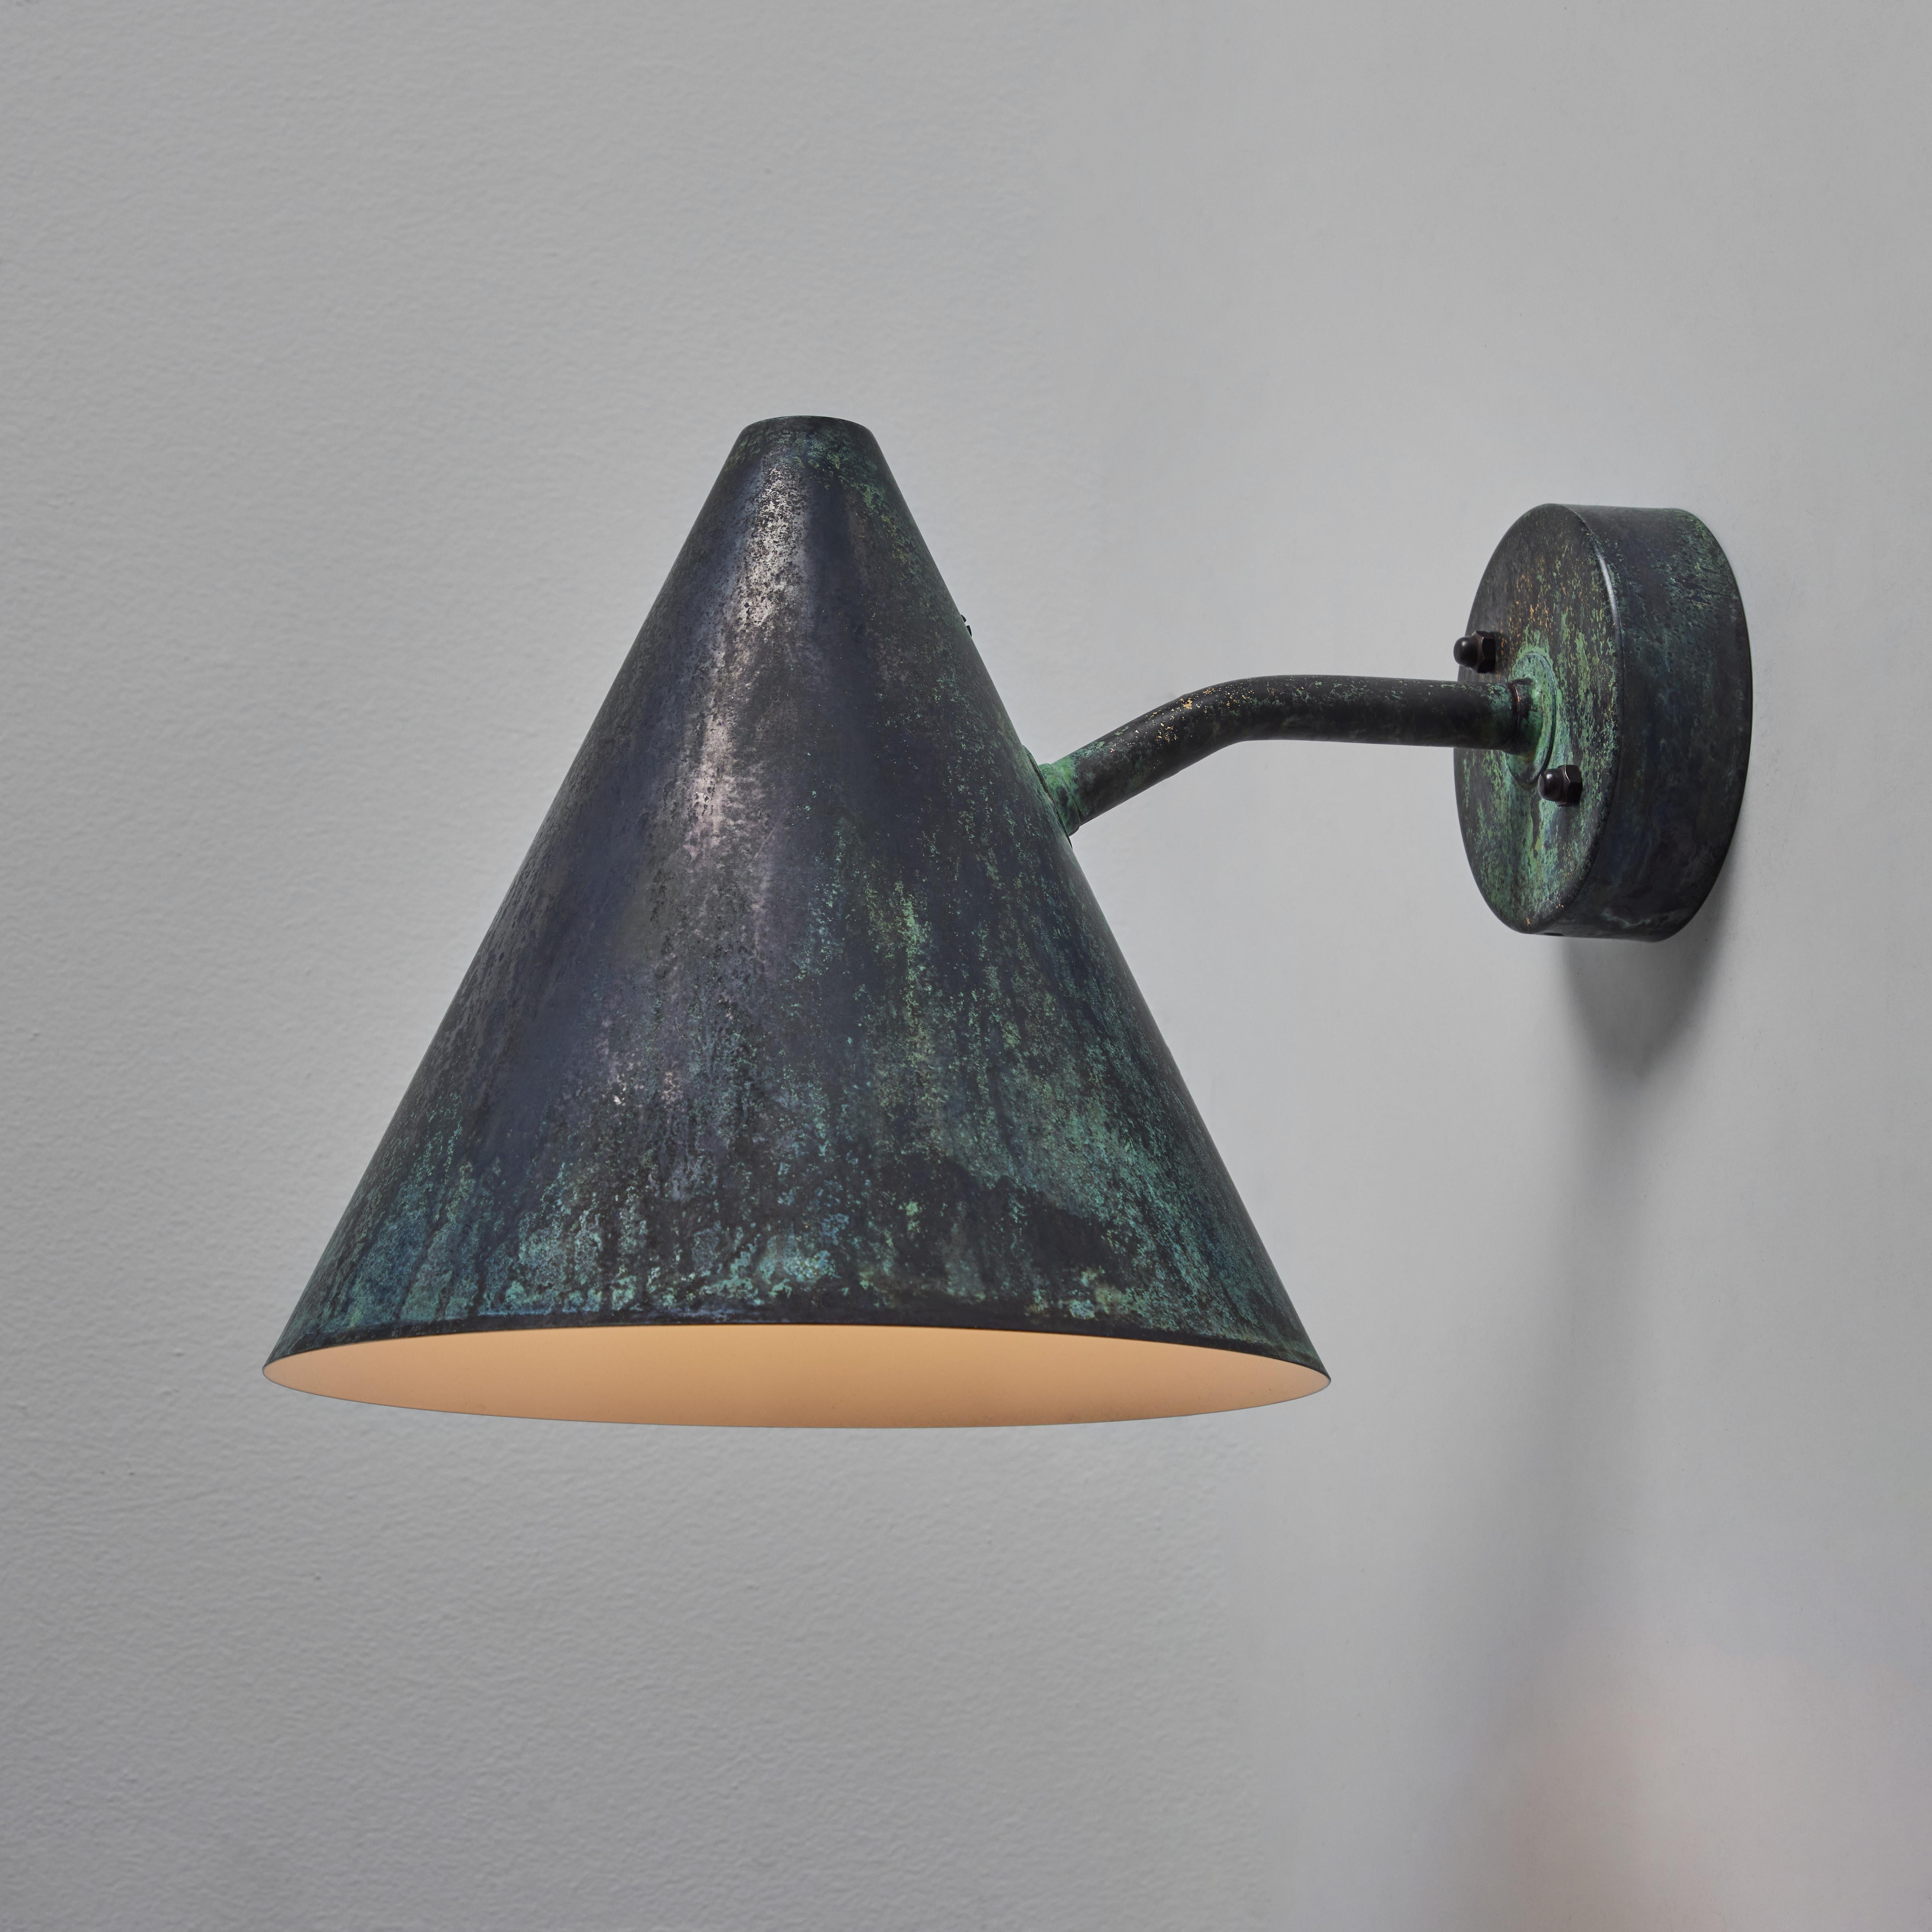 Hans-Agne Jakobsson 'Tratten' darkly patinated outdoor sconce. An exclusive made for U.S. and UL listed authorized re-edition of the classic Swedish design executed in richly and darkly patinated metal with white-painted interior. Suitable for both